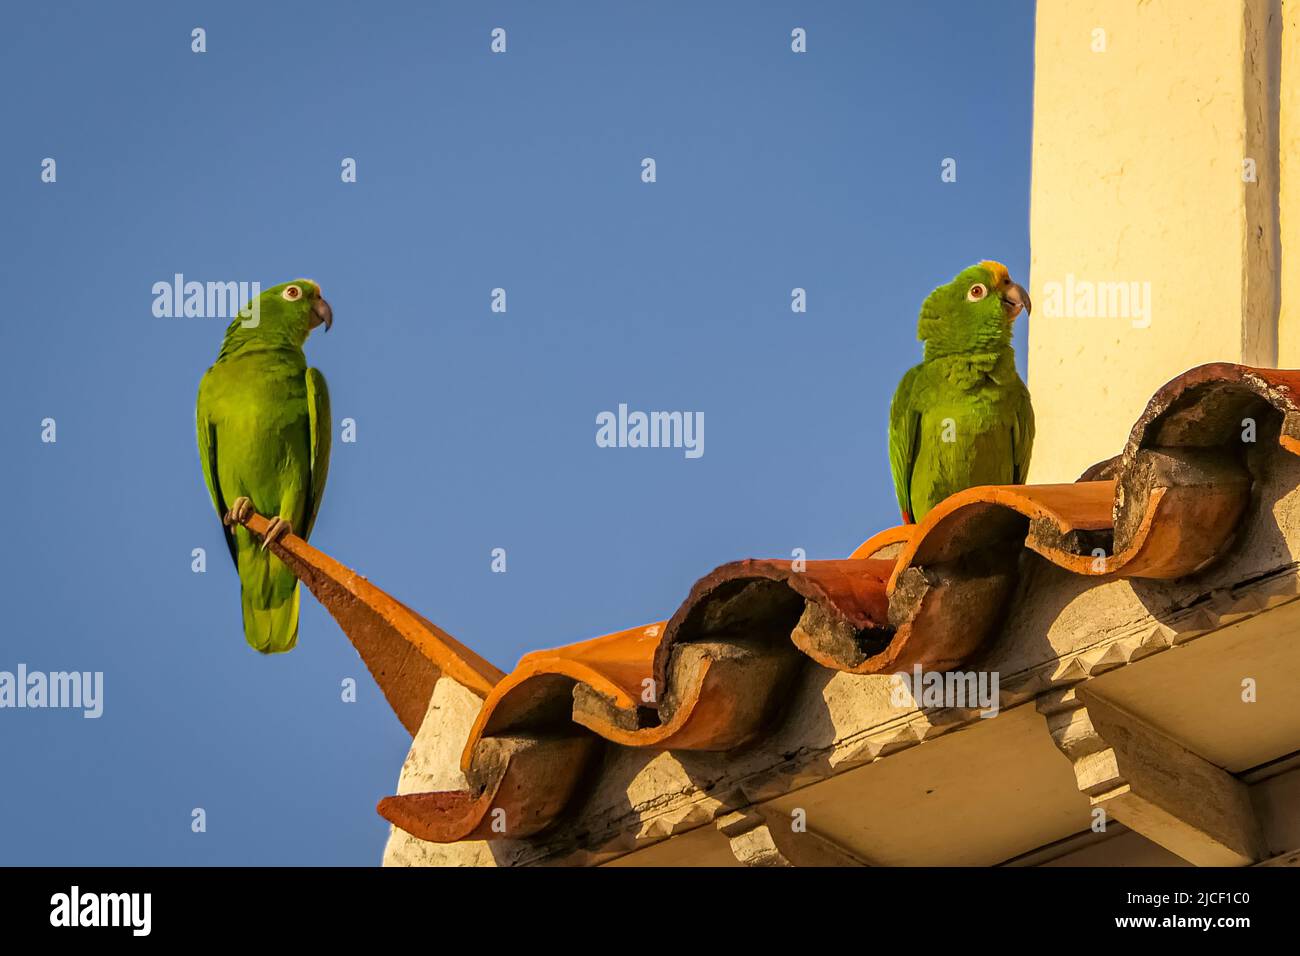 Two Yellow-crowned parrots sitting on red roof tiles against deep blue sky Stock Photo